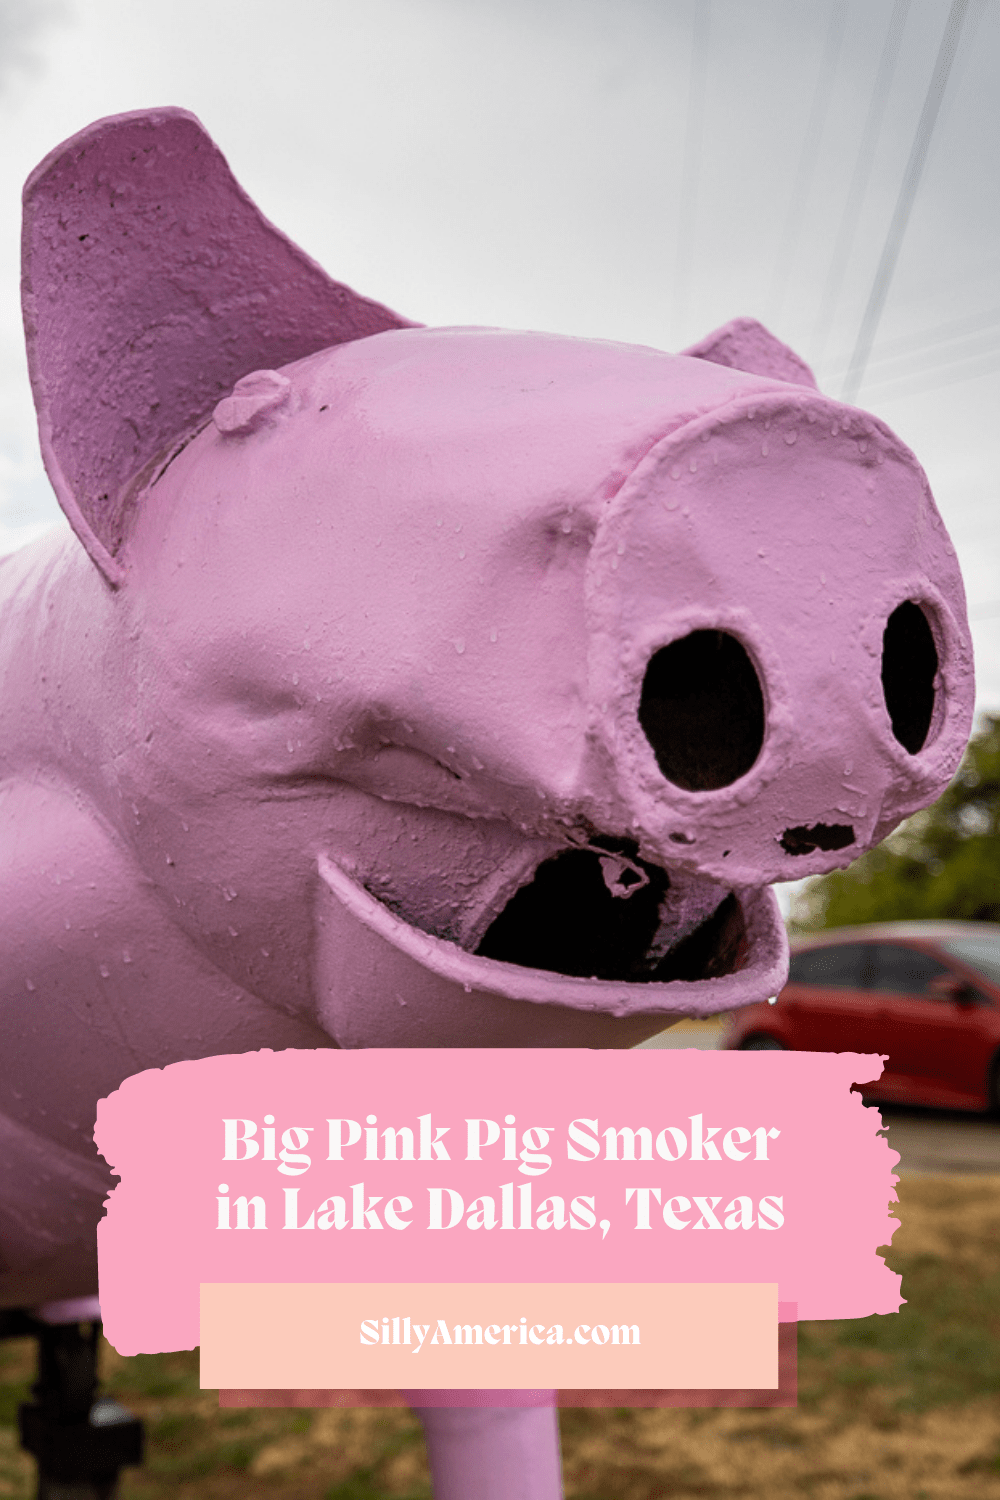 I found this Texas roadside attraction and didn’t want to hog it for myself. This big pink pig smoker at Chasin’ Tail BBQ in Lake Dallas, Texas is anything but boar-ing. The homemade meat smoker makes a clever twist out of a piece of equipment used to smoke the meats you find at most Texas barbecues. #Texas #TexasRoadTrip #RoadTripStop #RoadsideAttraction #RoadsideAttractions #TexasRoadsideAttraction